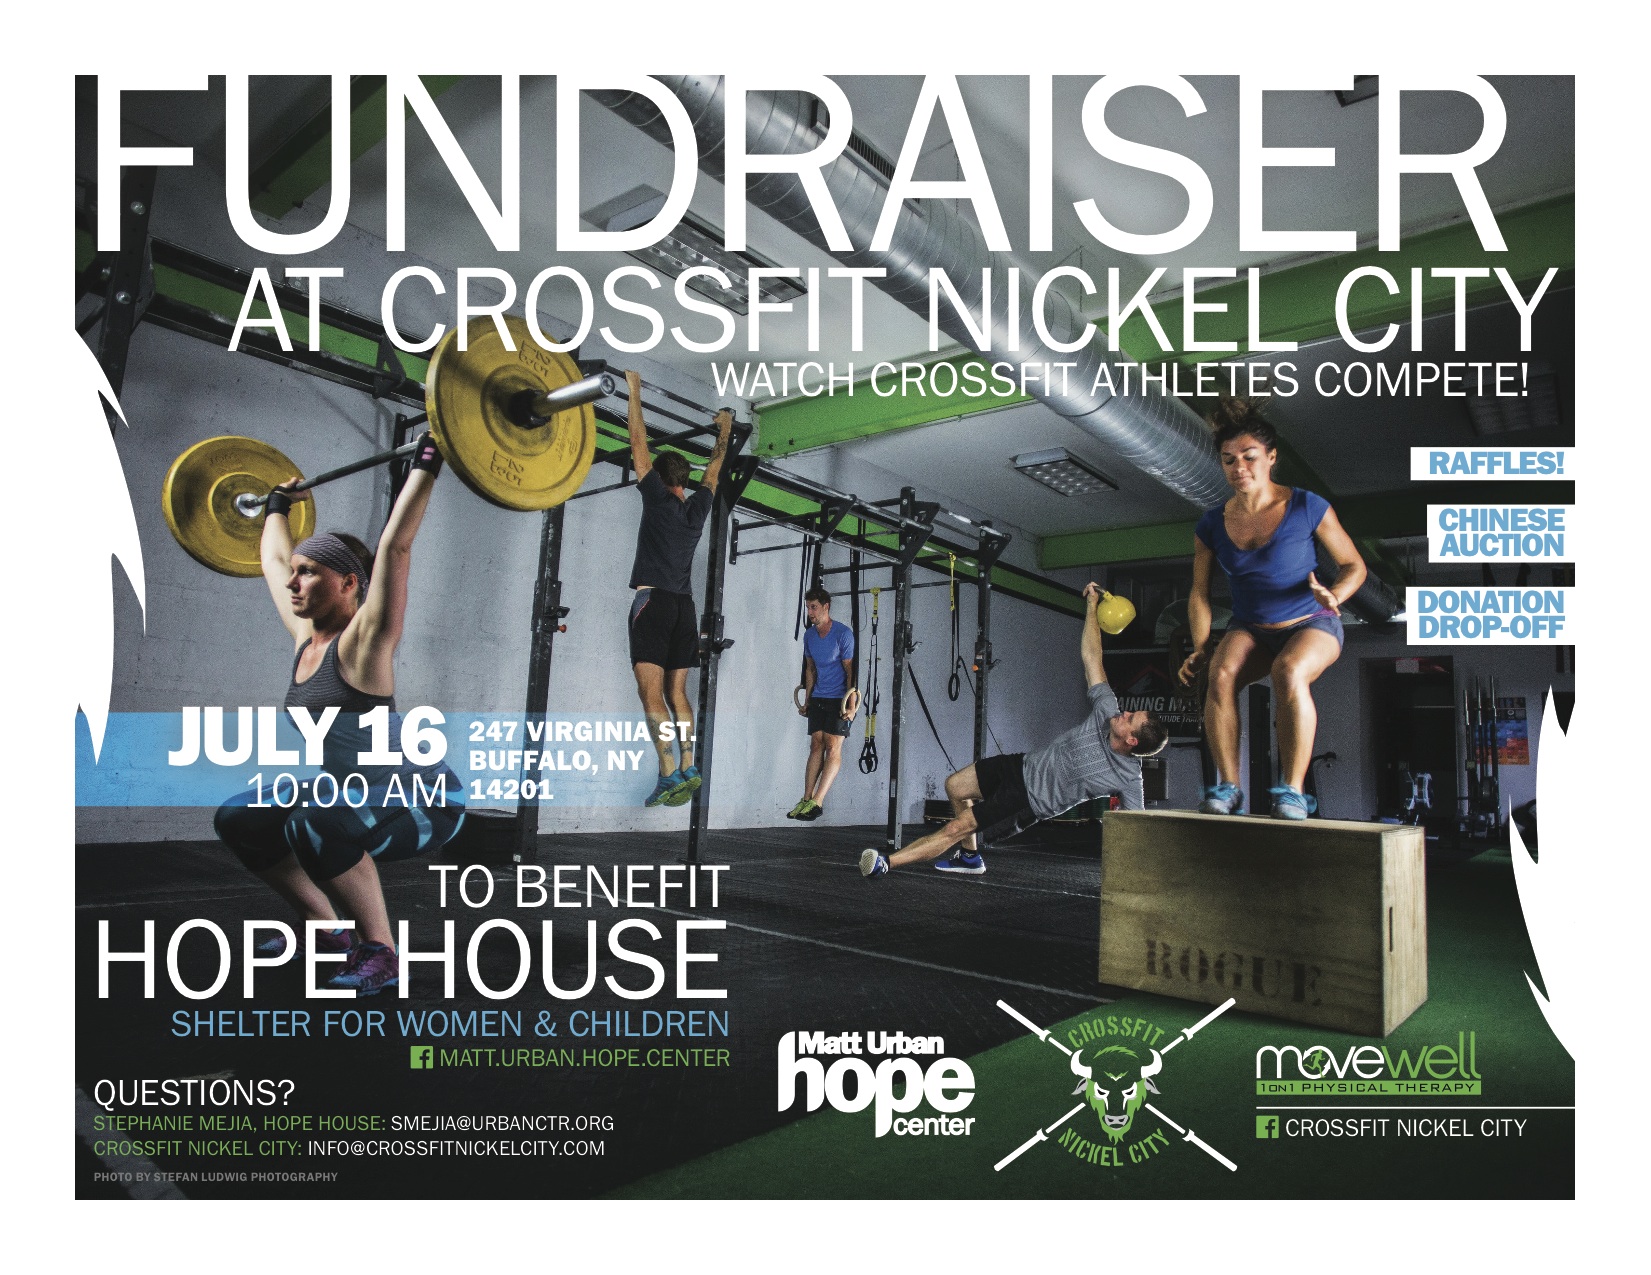 CrossFit event on July 16 to benefit HOPE House shelter for women and children